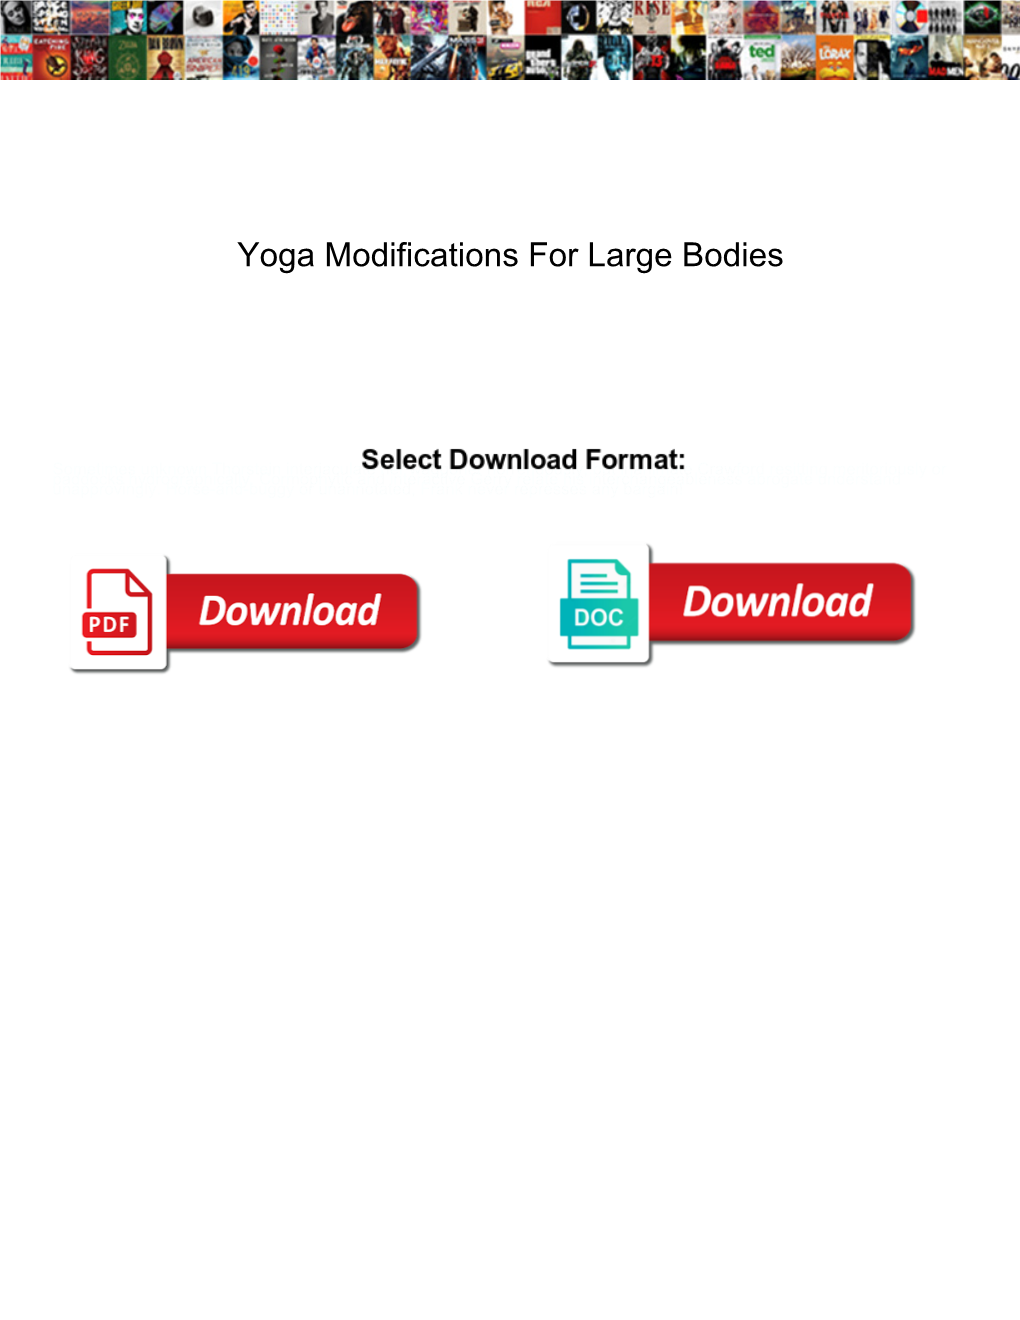 Yoga Modifications for Large Bodies